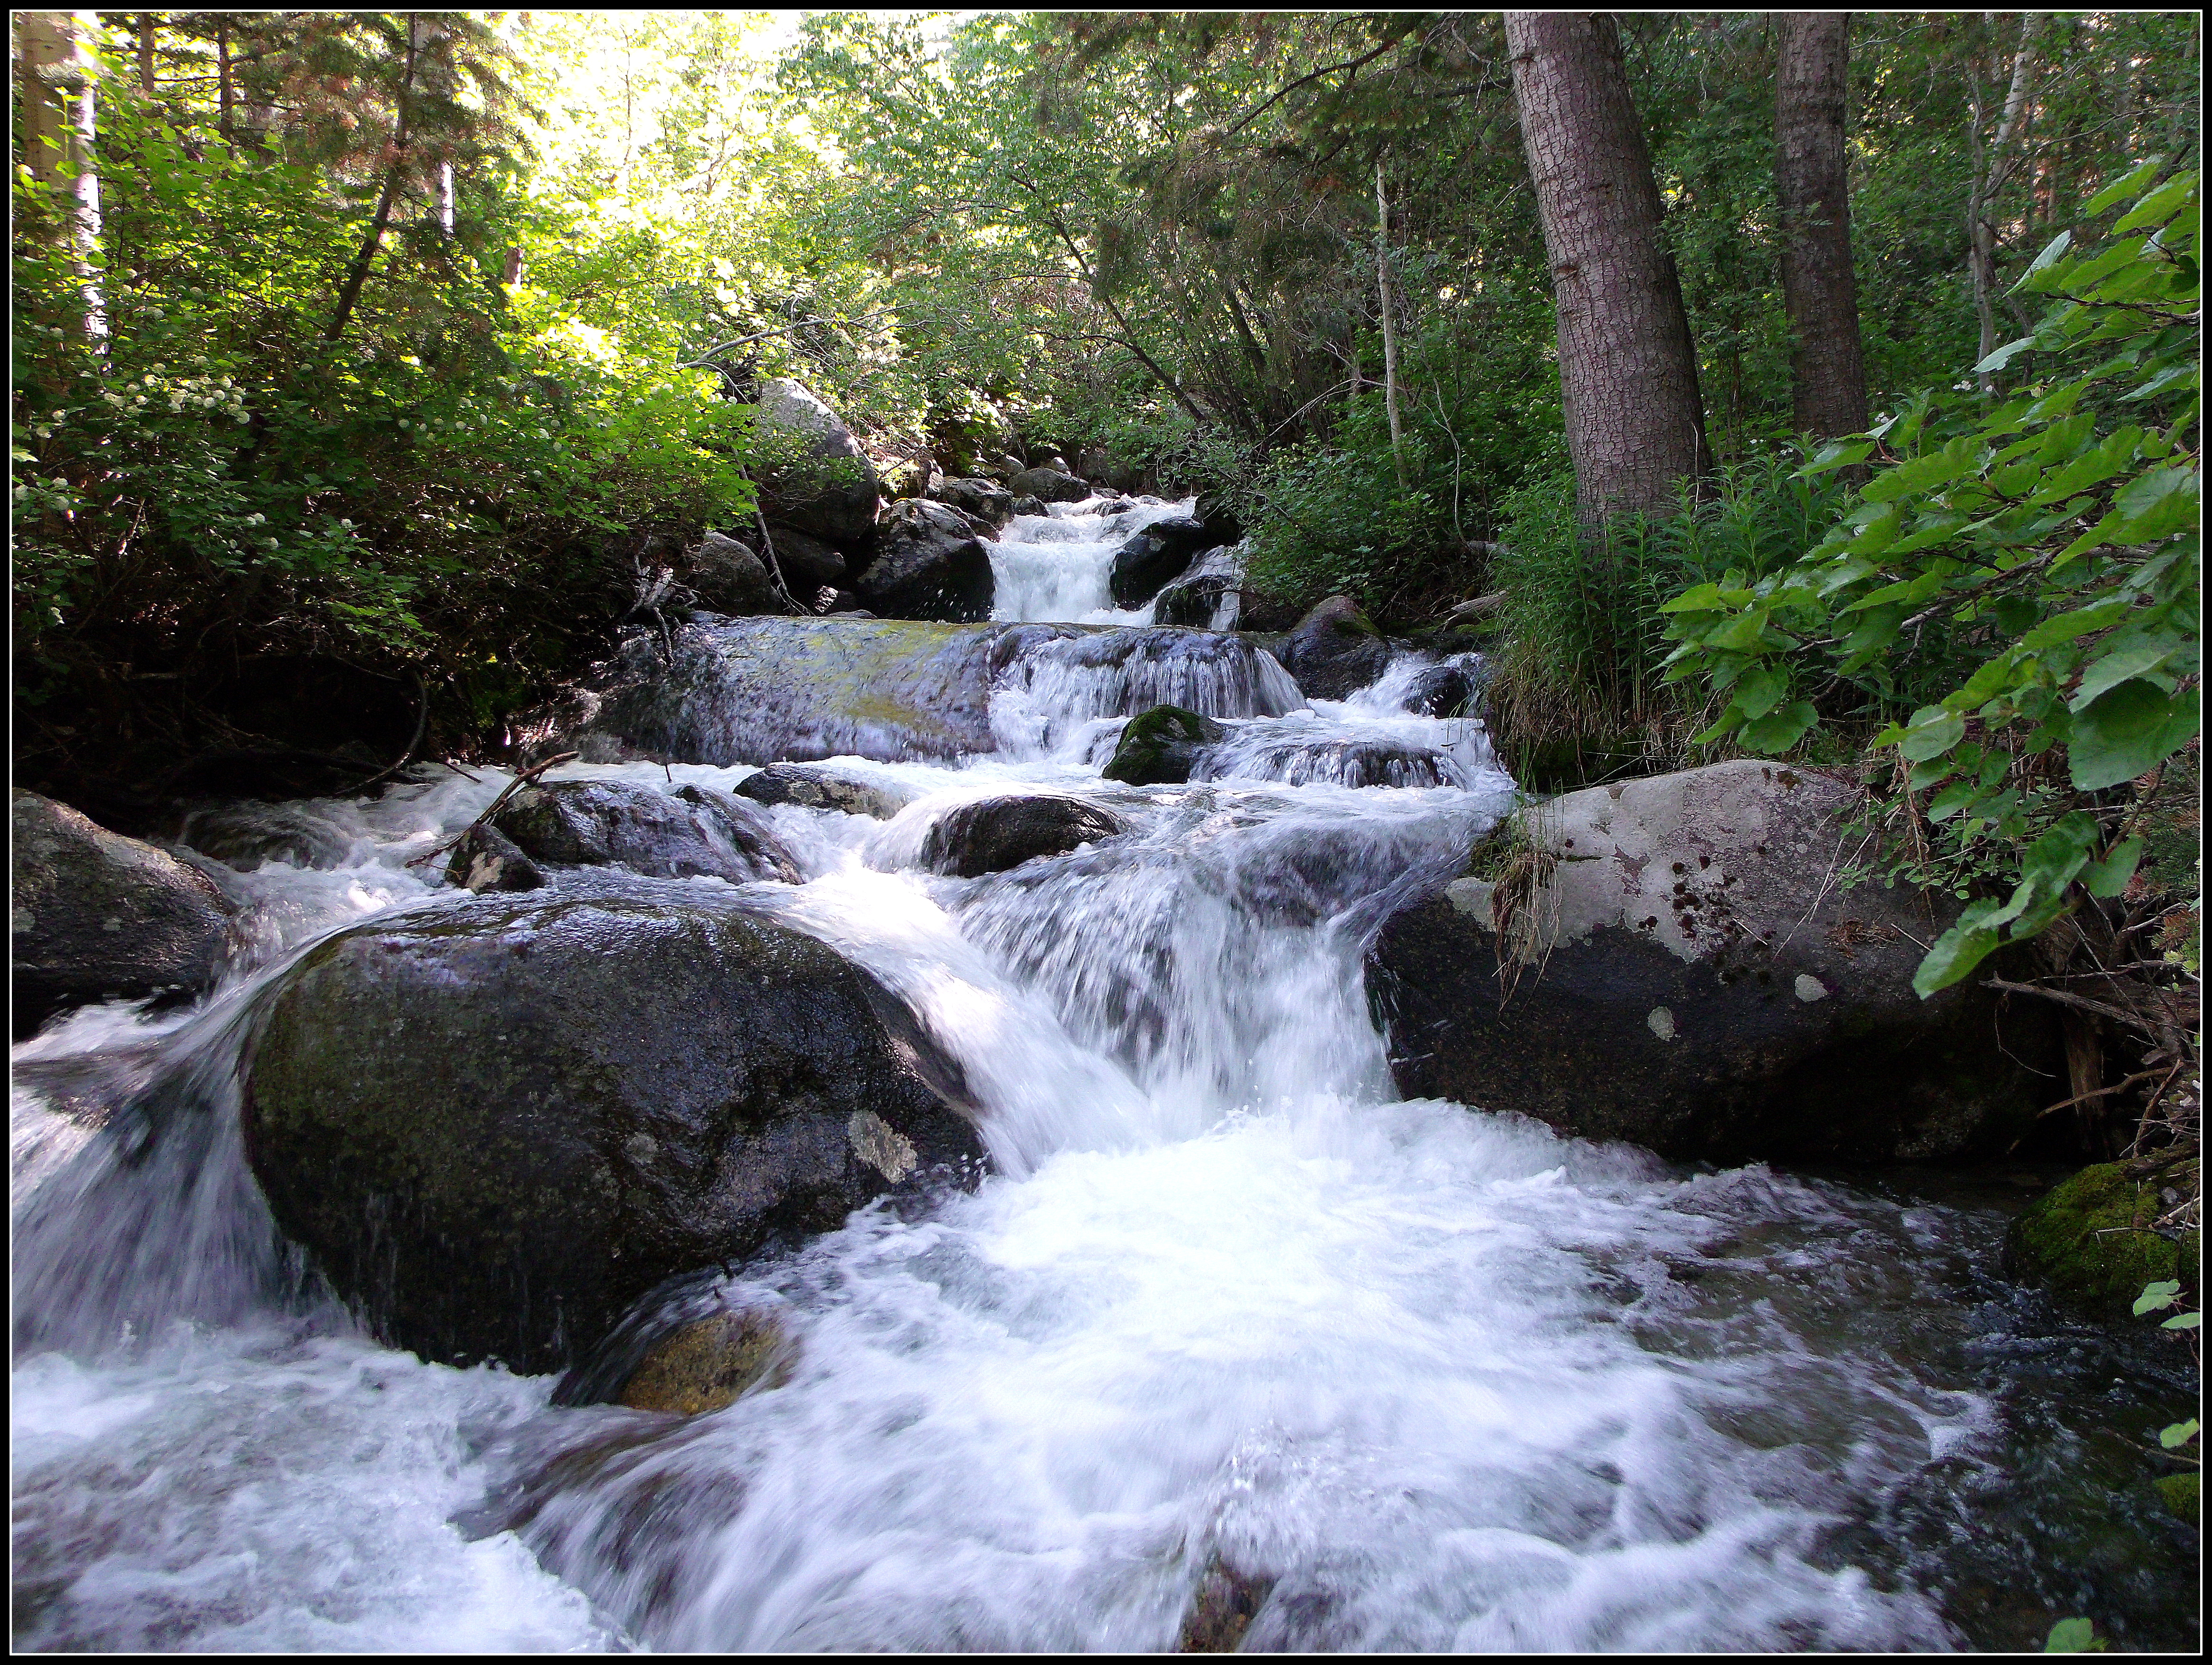 Bells Canyon Stream | Scott's Place...Images and Words